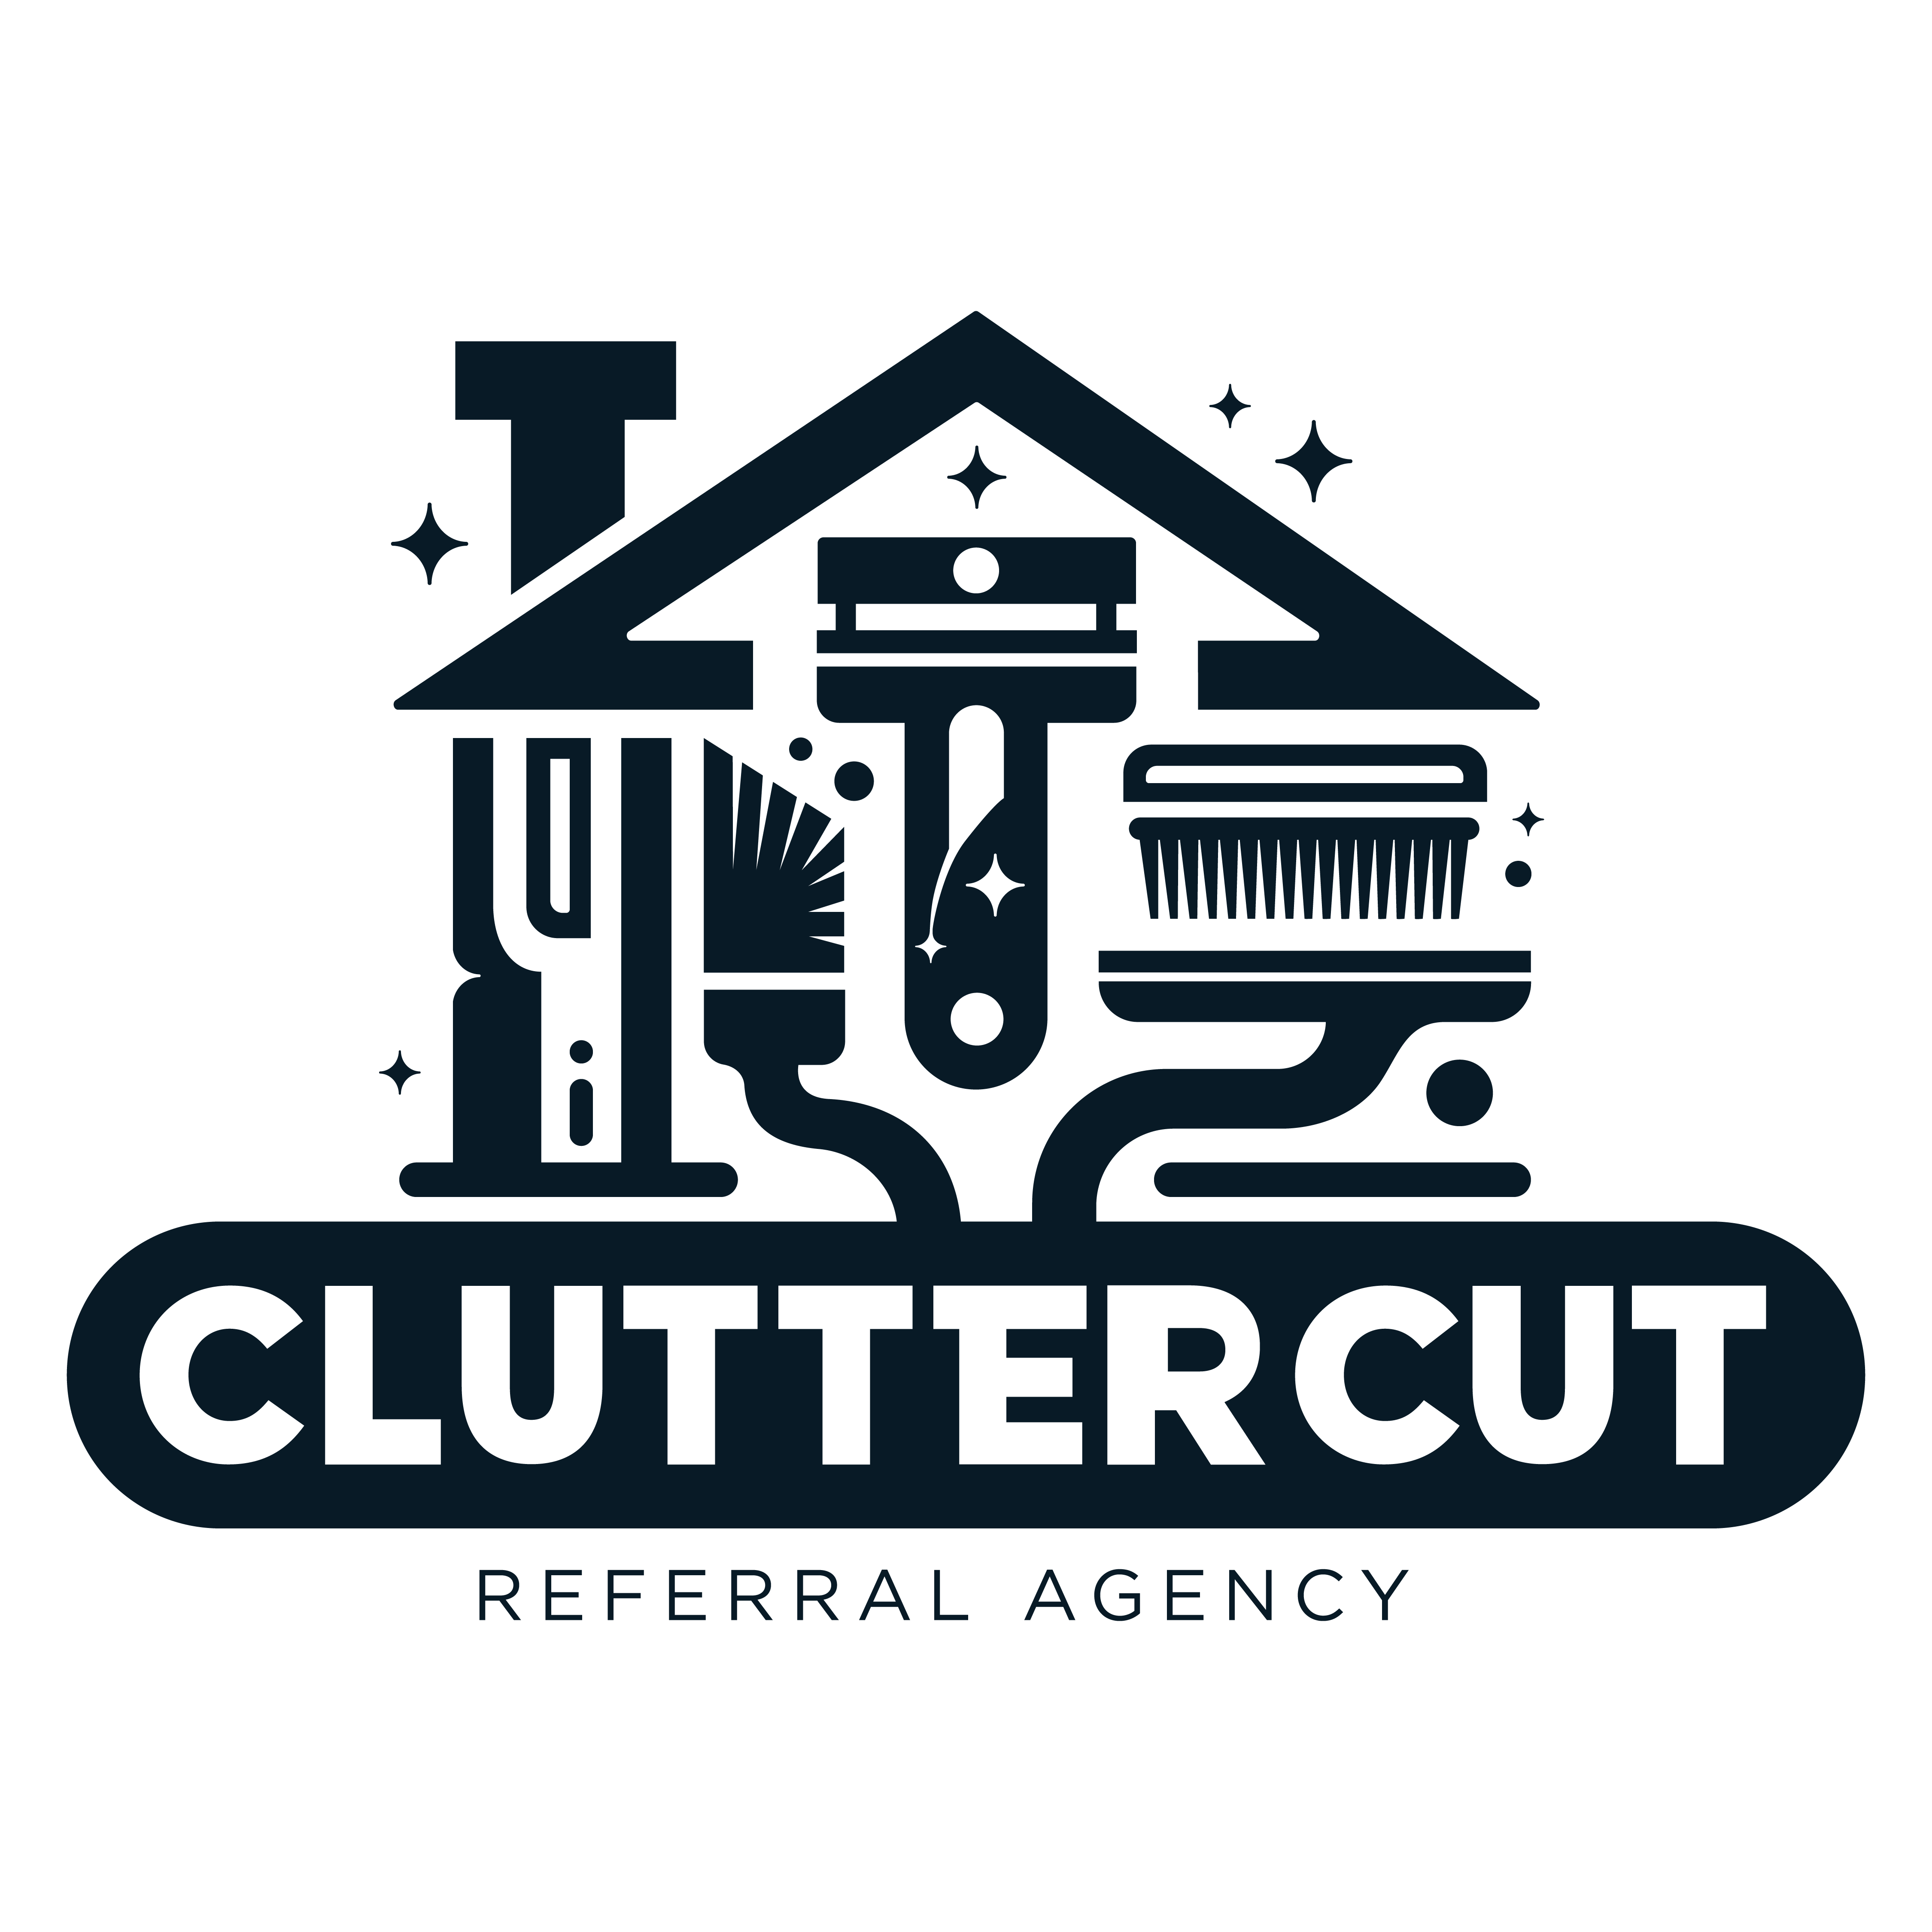 Logo of "clutter cut referral agency" featuring cleaning tools and a house silhouette.